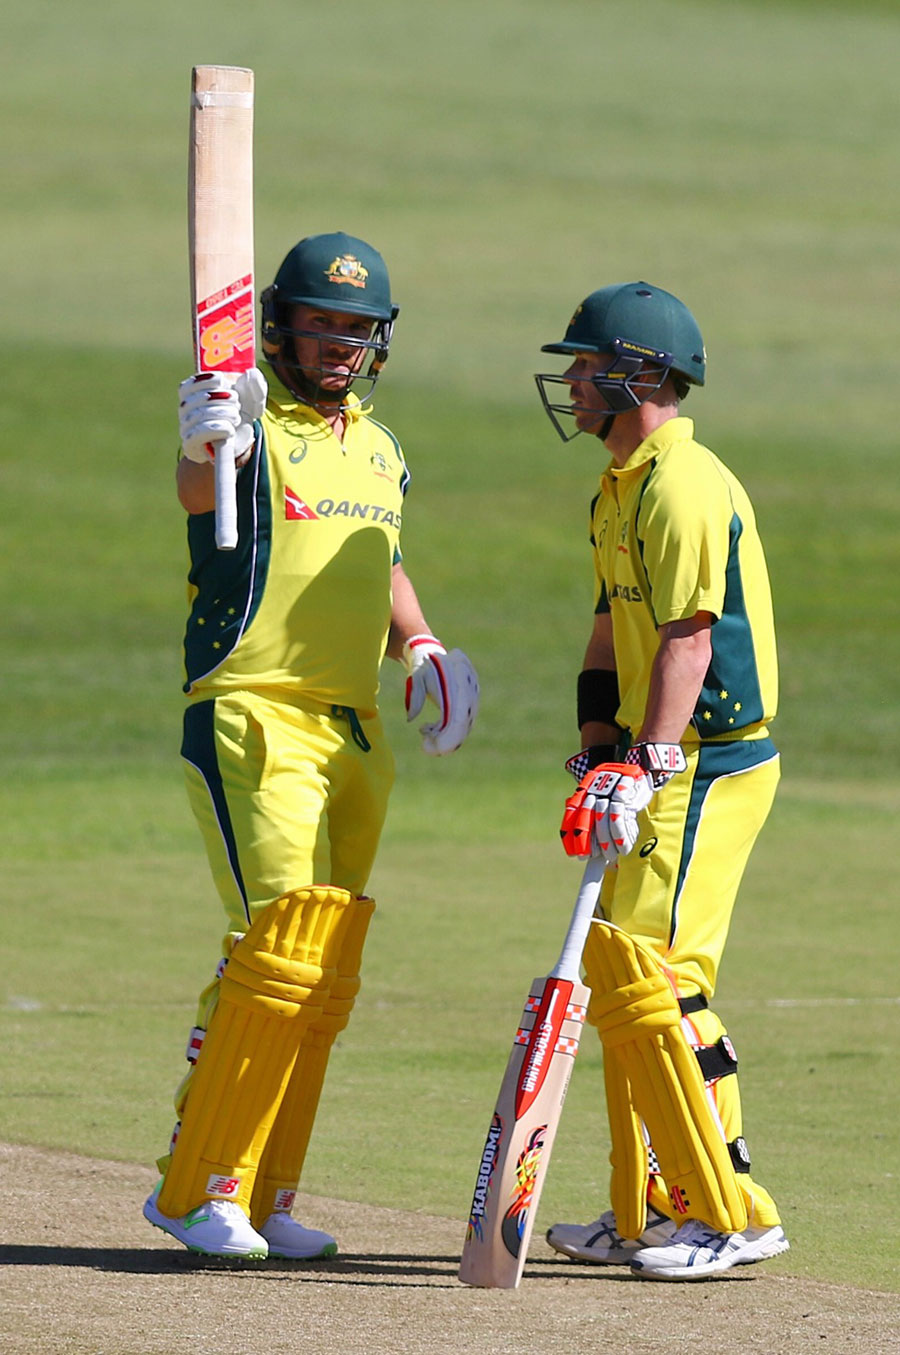 Aaron Finch brought up his half-century from 32 deliveries during the 3rd ODI between Australia and South Africa at Durban on Wednesday.